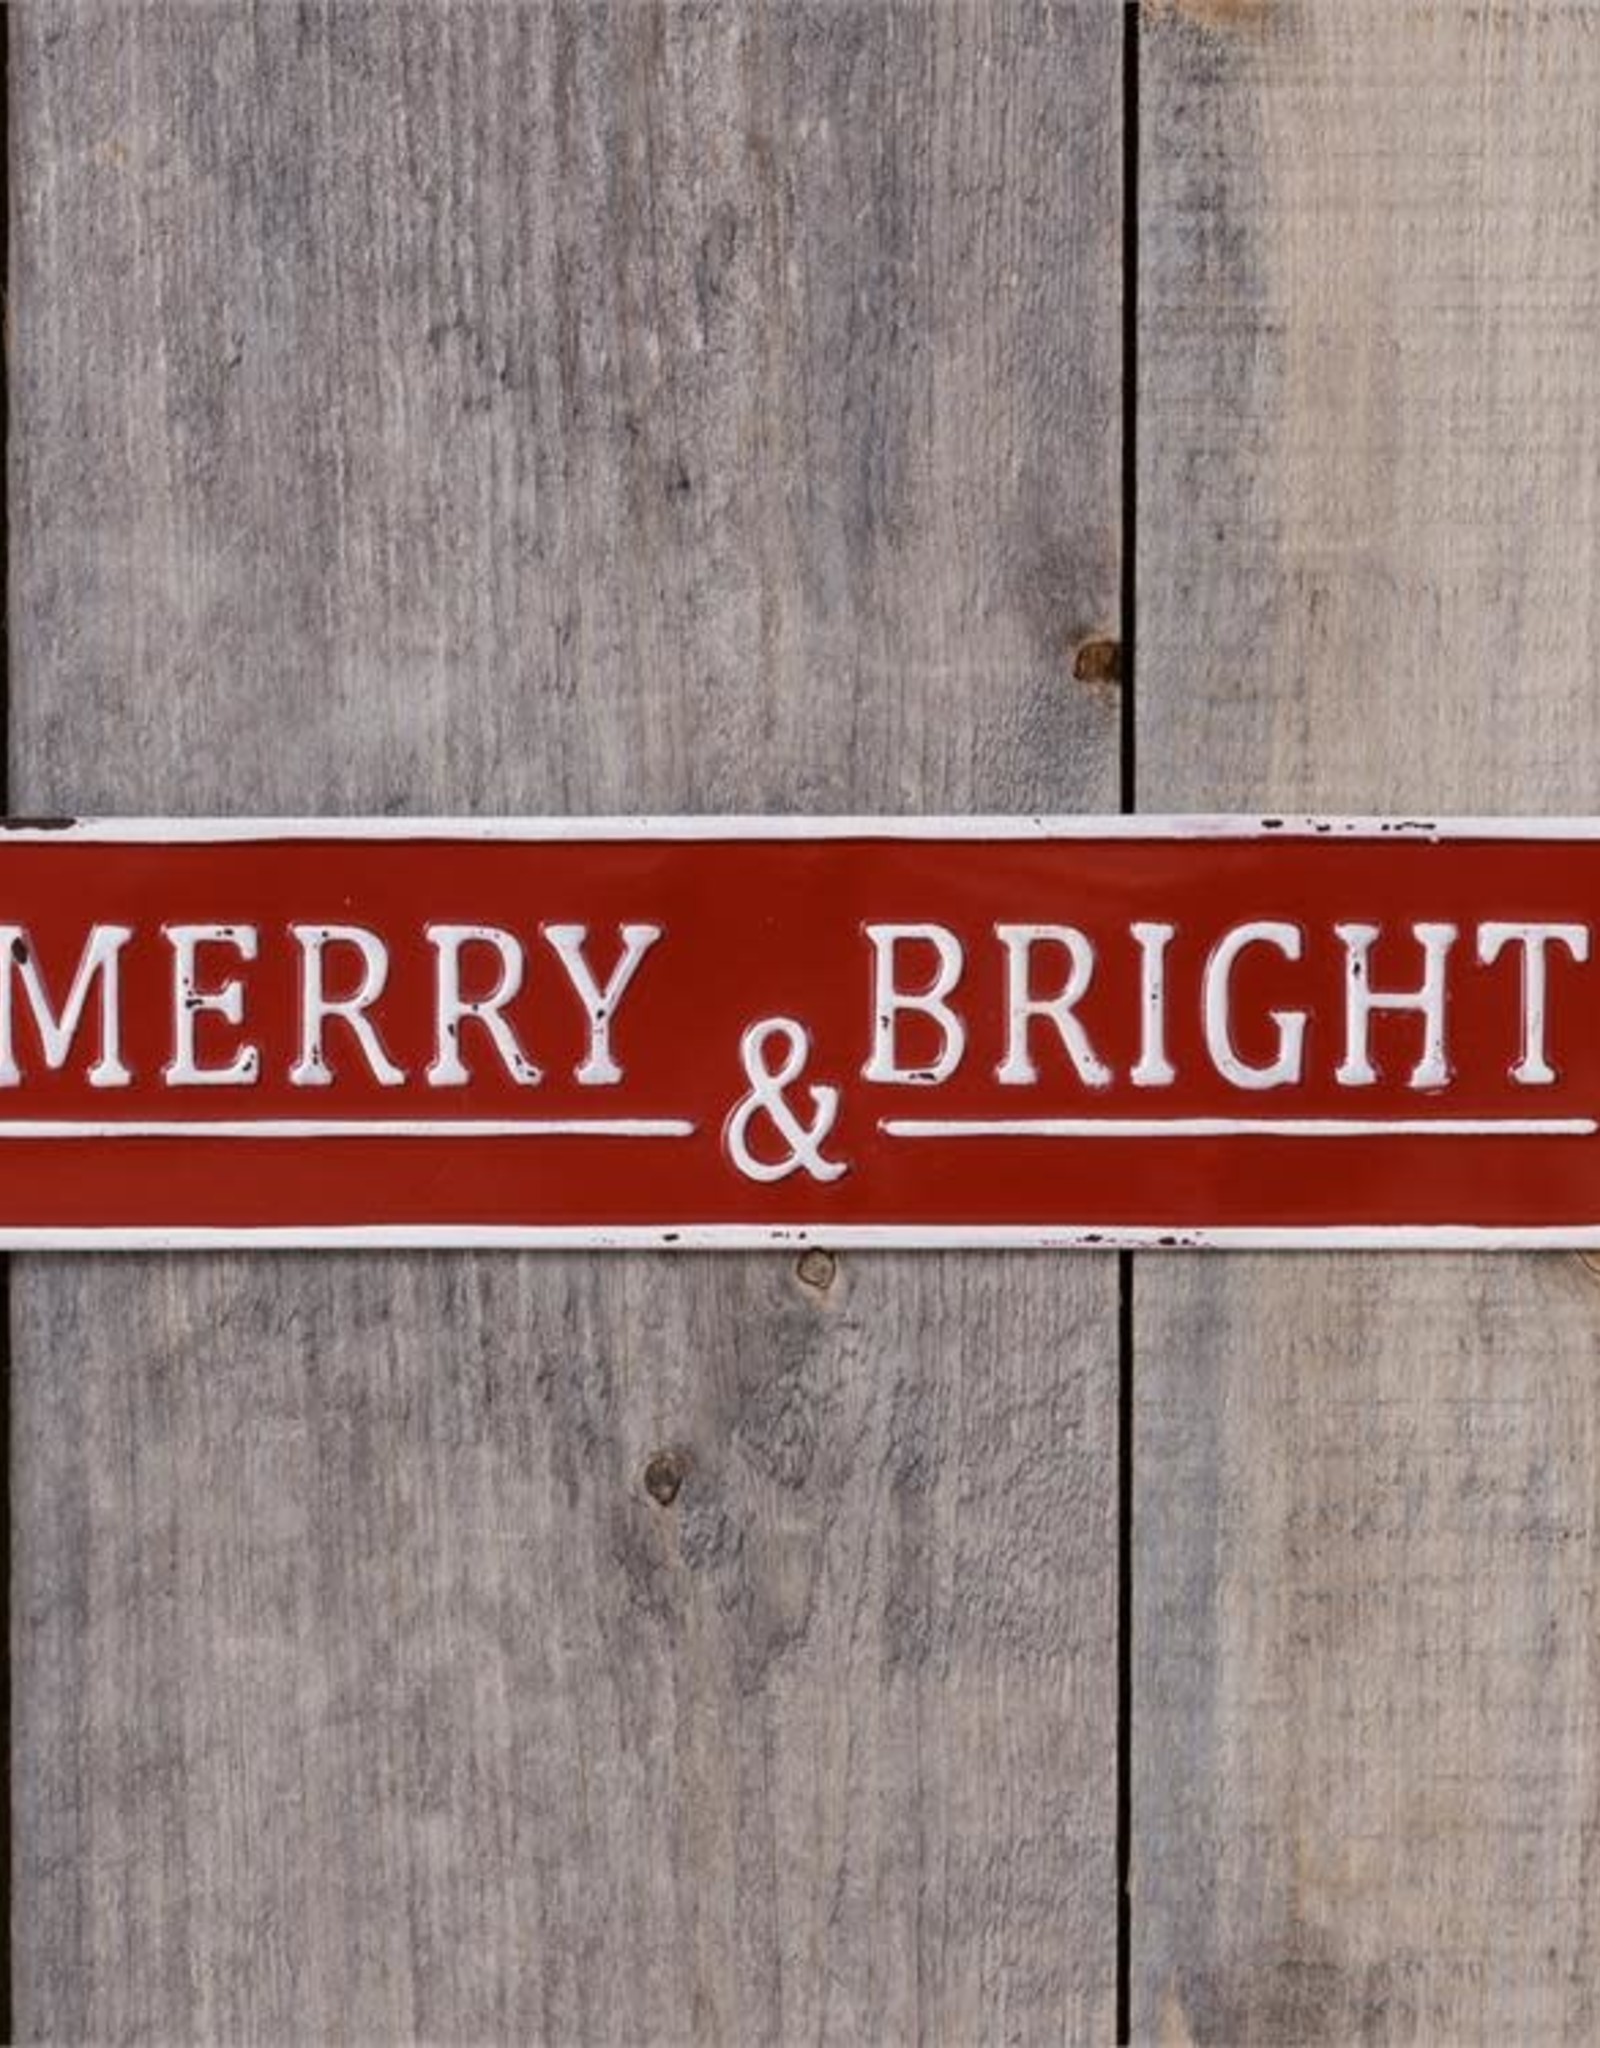 Sign - Merry and Bright